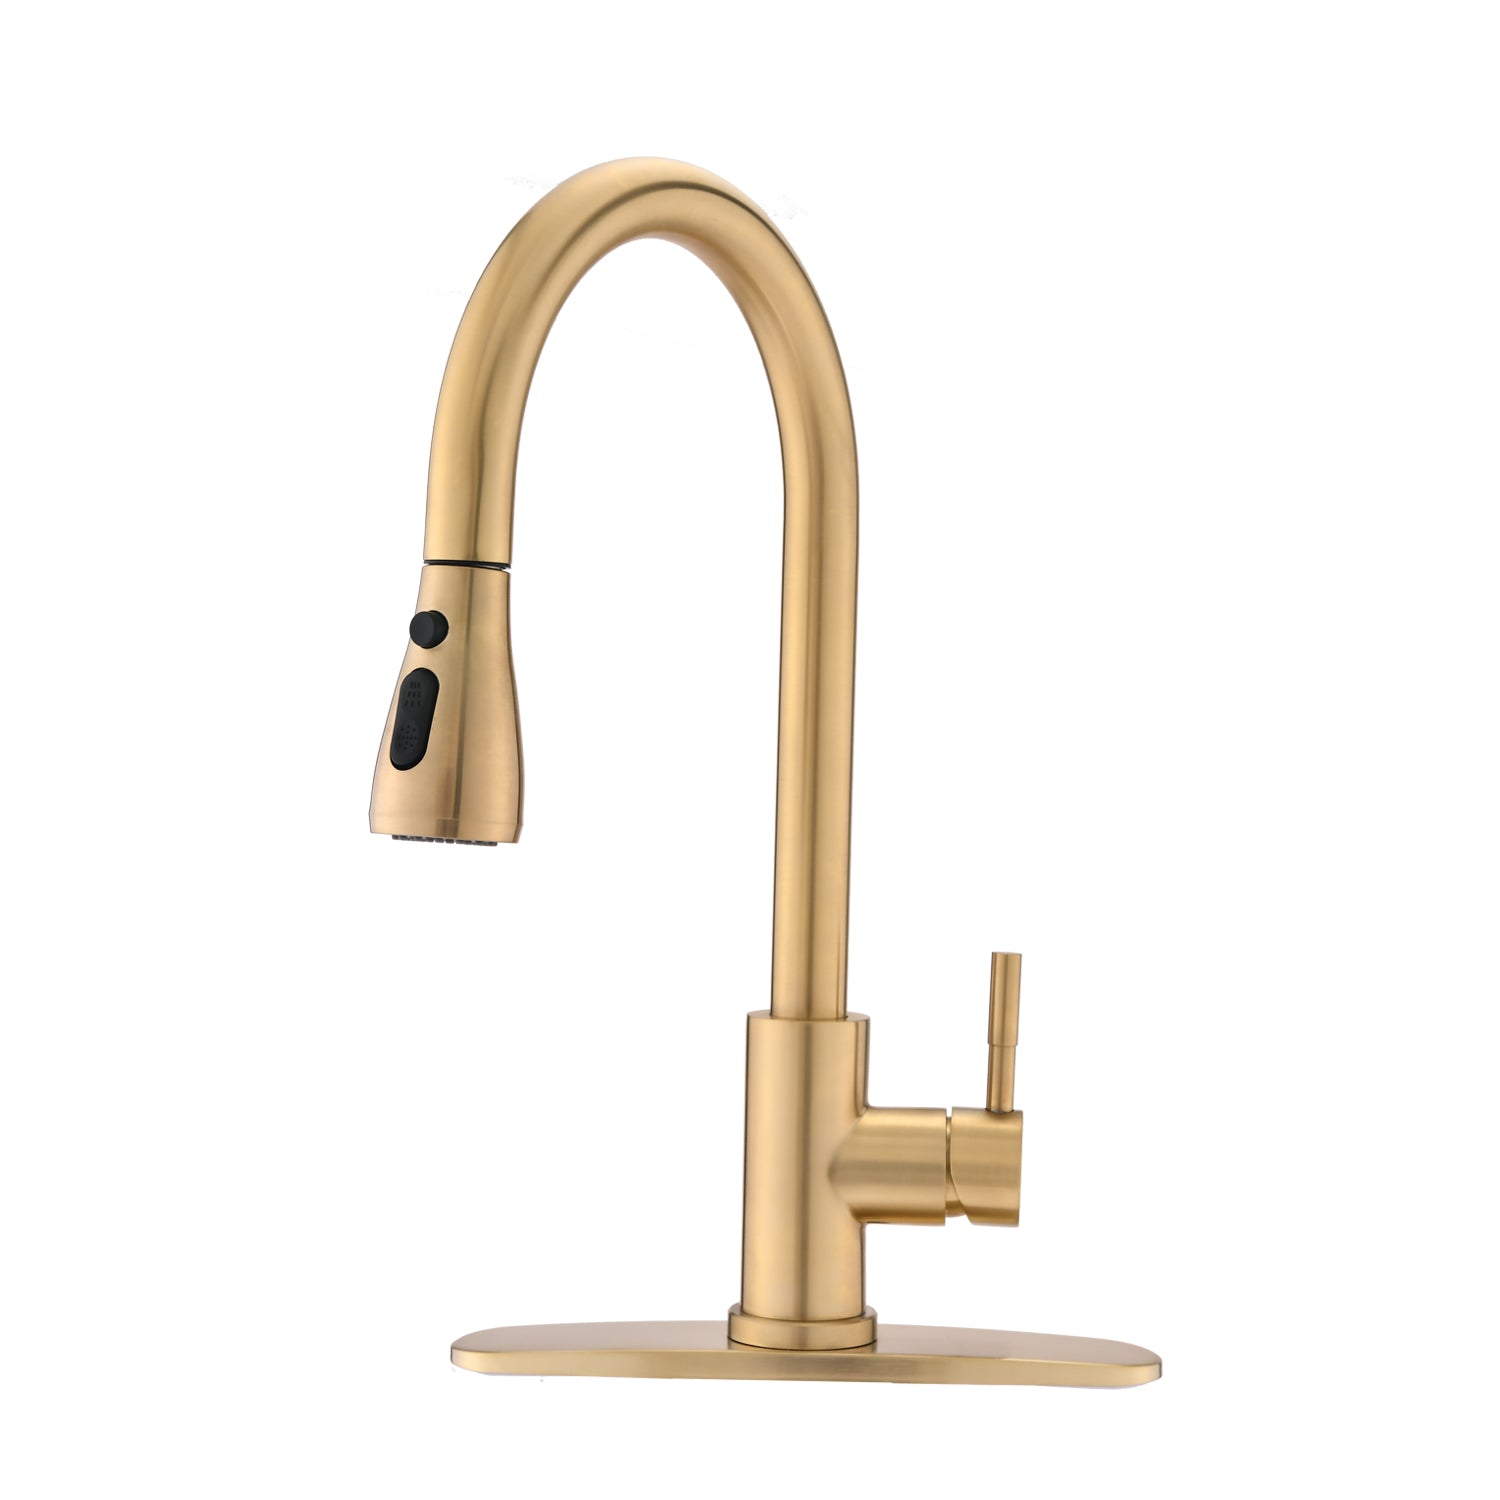 ZNTS Pull Down Kitchen Faucet with Sprayer Stainless Steel Brushed Gold JYD3411BG